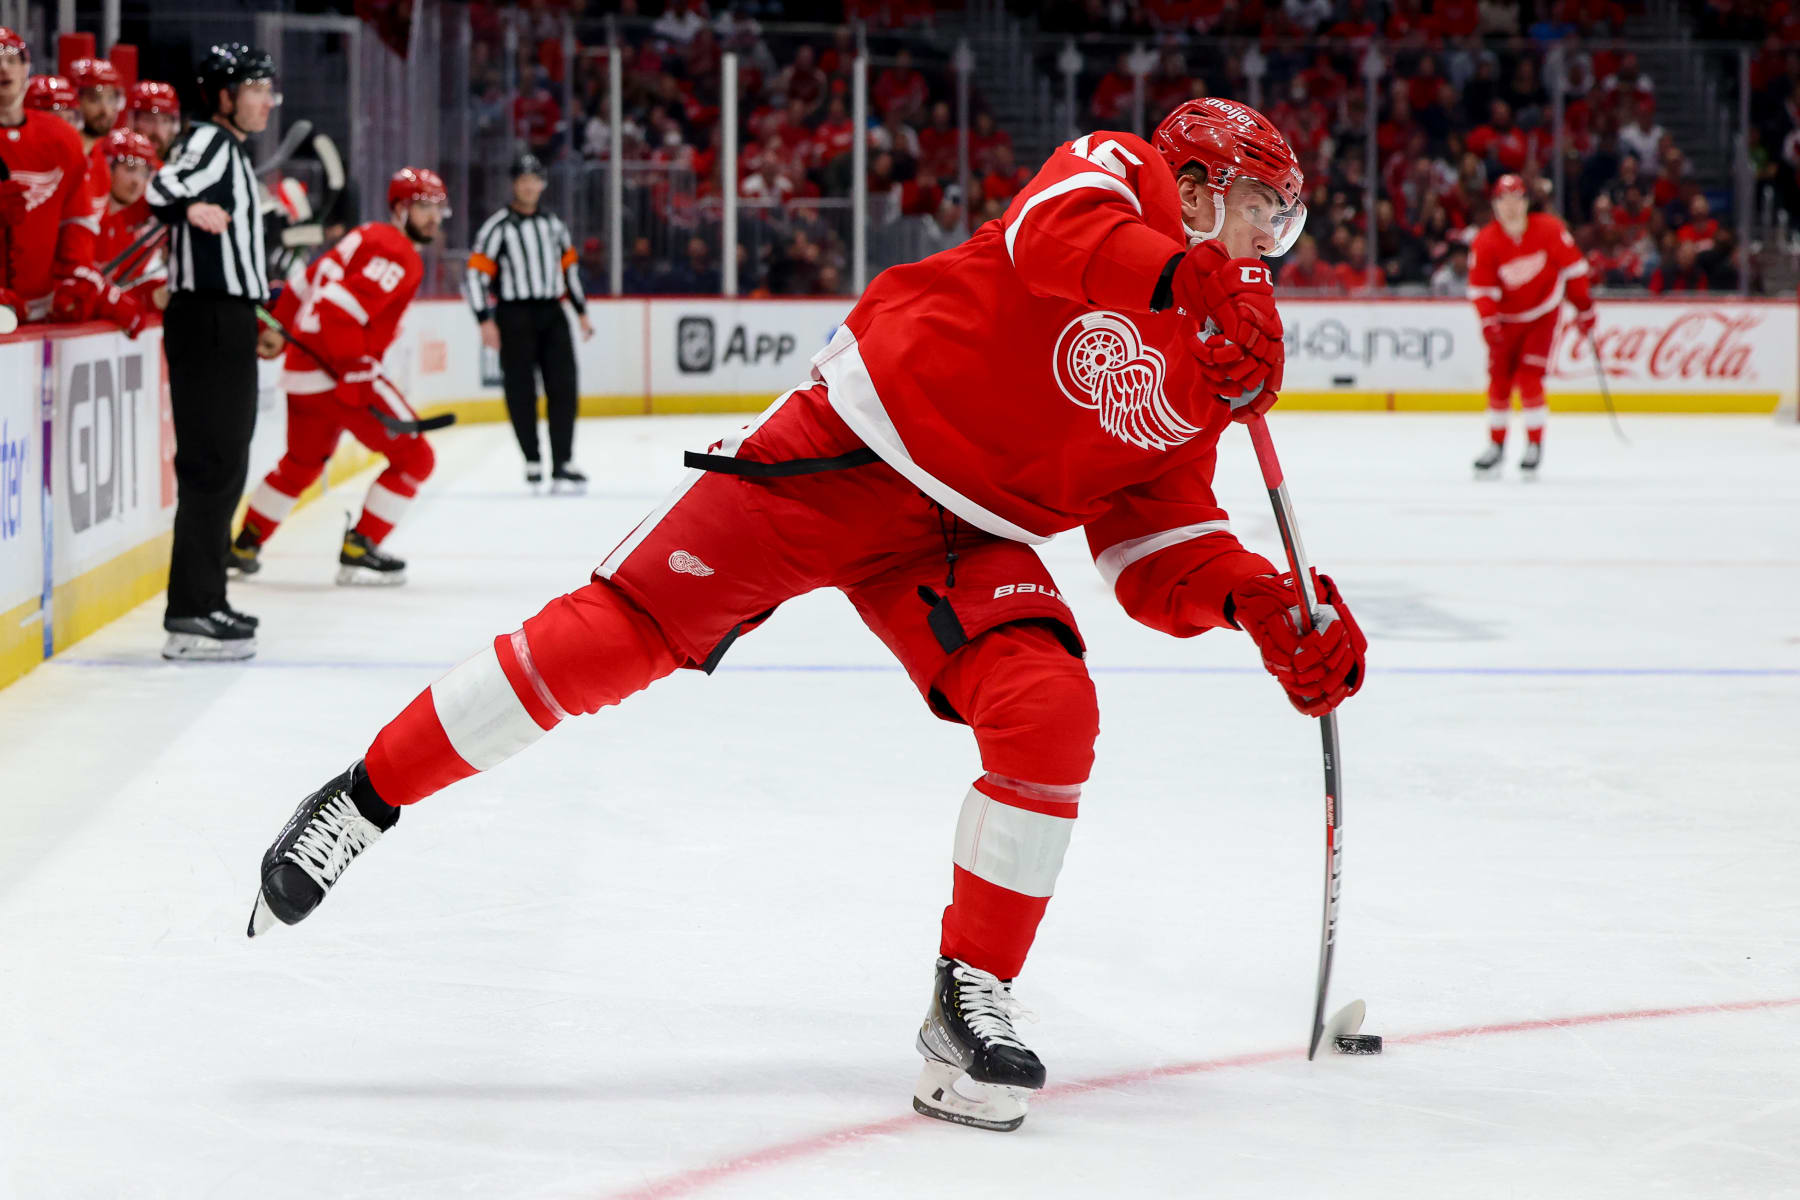 The Detroit Red Wings need to consider claiming Kasperi Kapanen